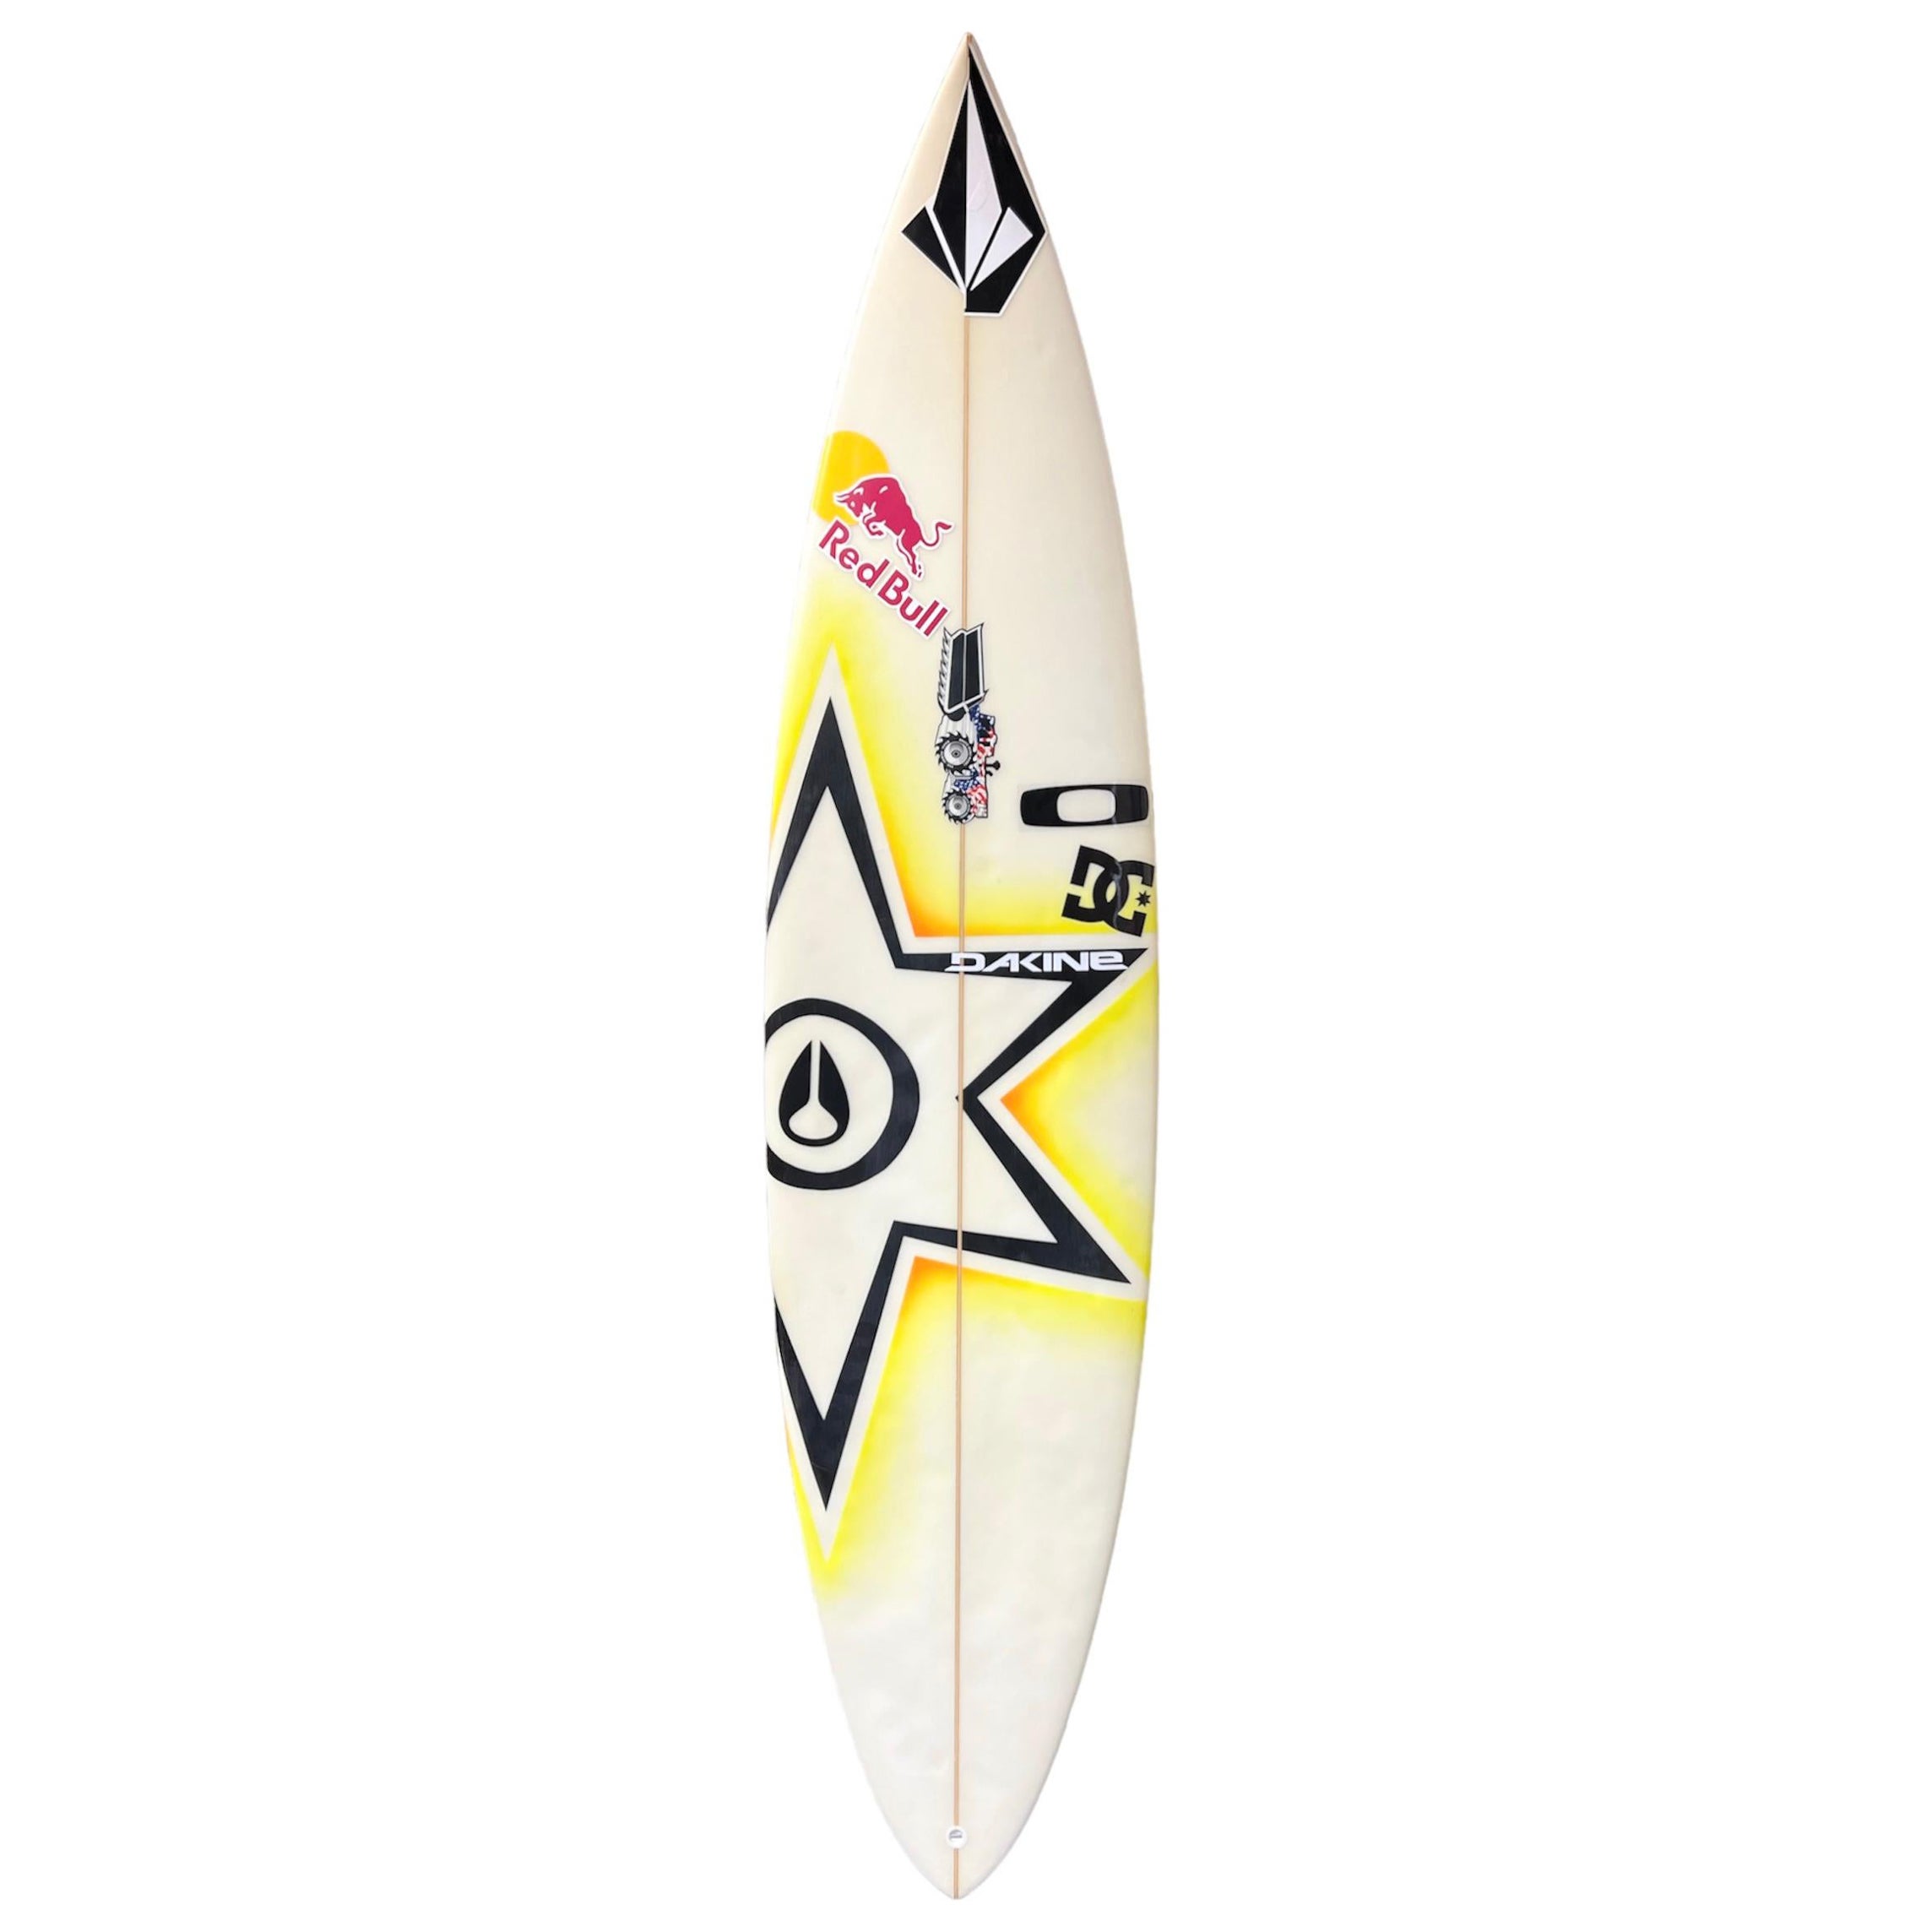 Champion Surfer Bruce Iron’s personal surfboard by JS Industries